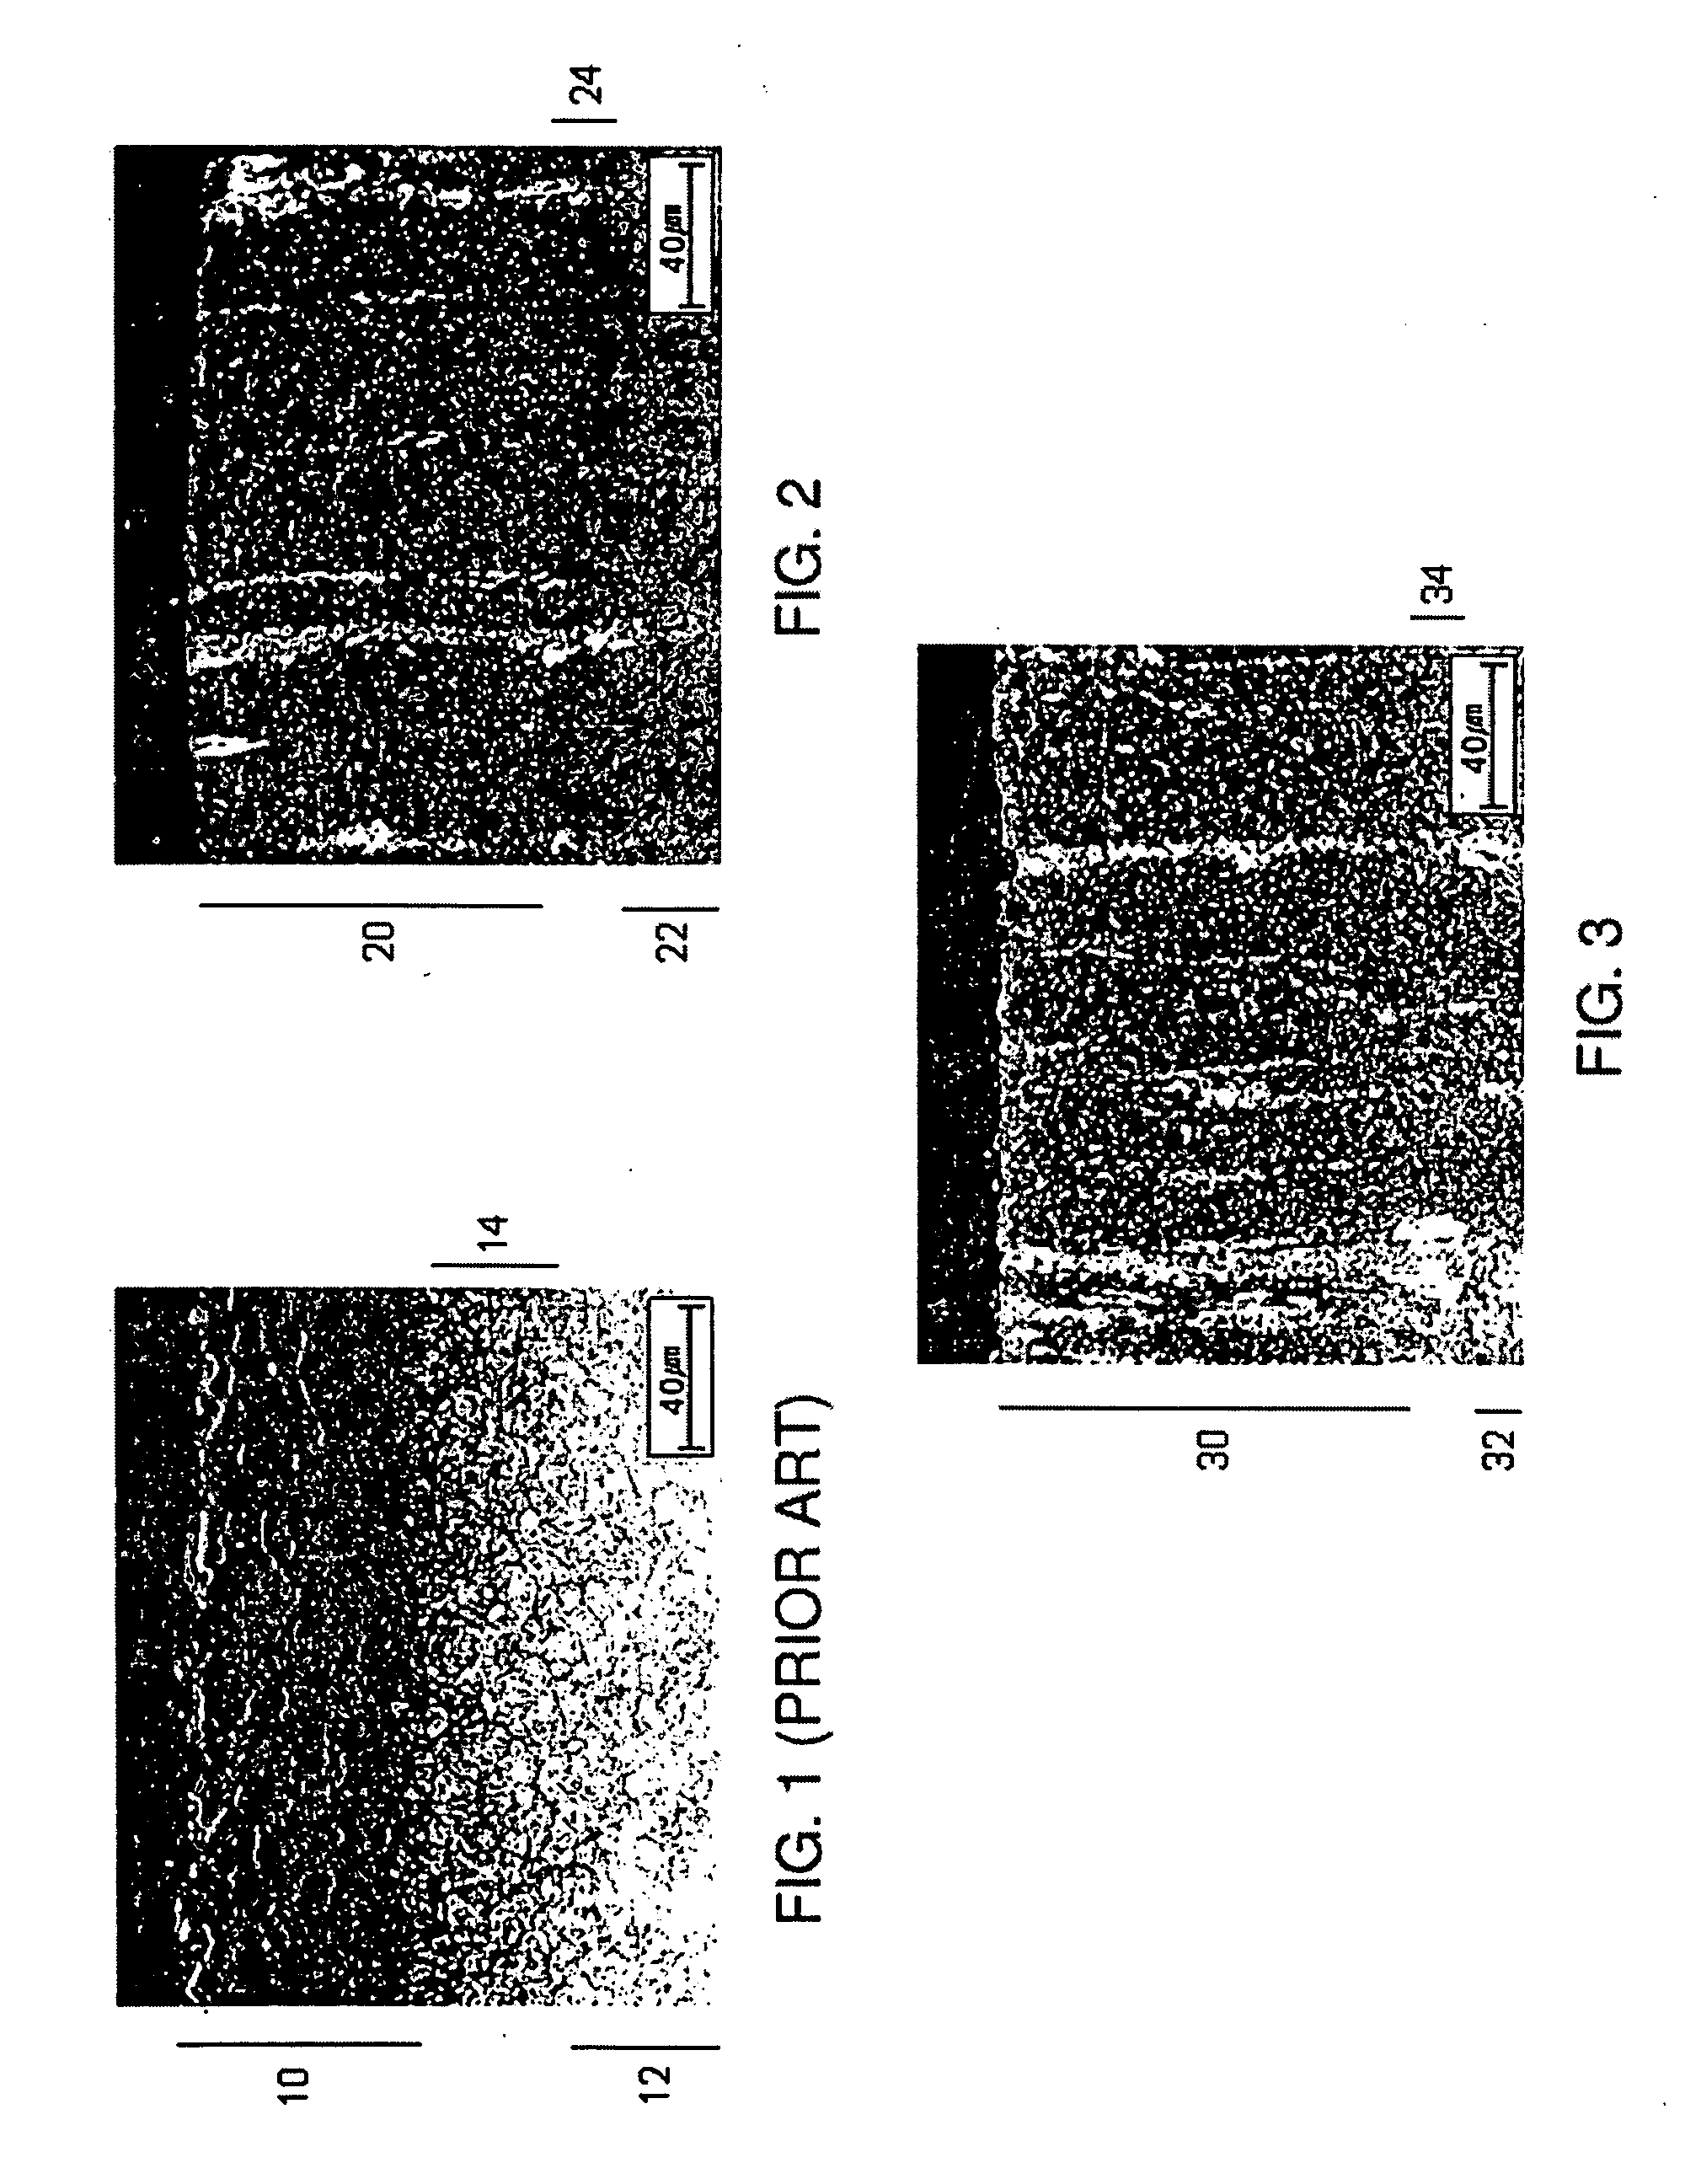 Process for diffusing titanium and nitride into a steel or steel alloy by altering the content of such